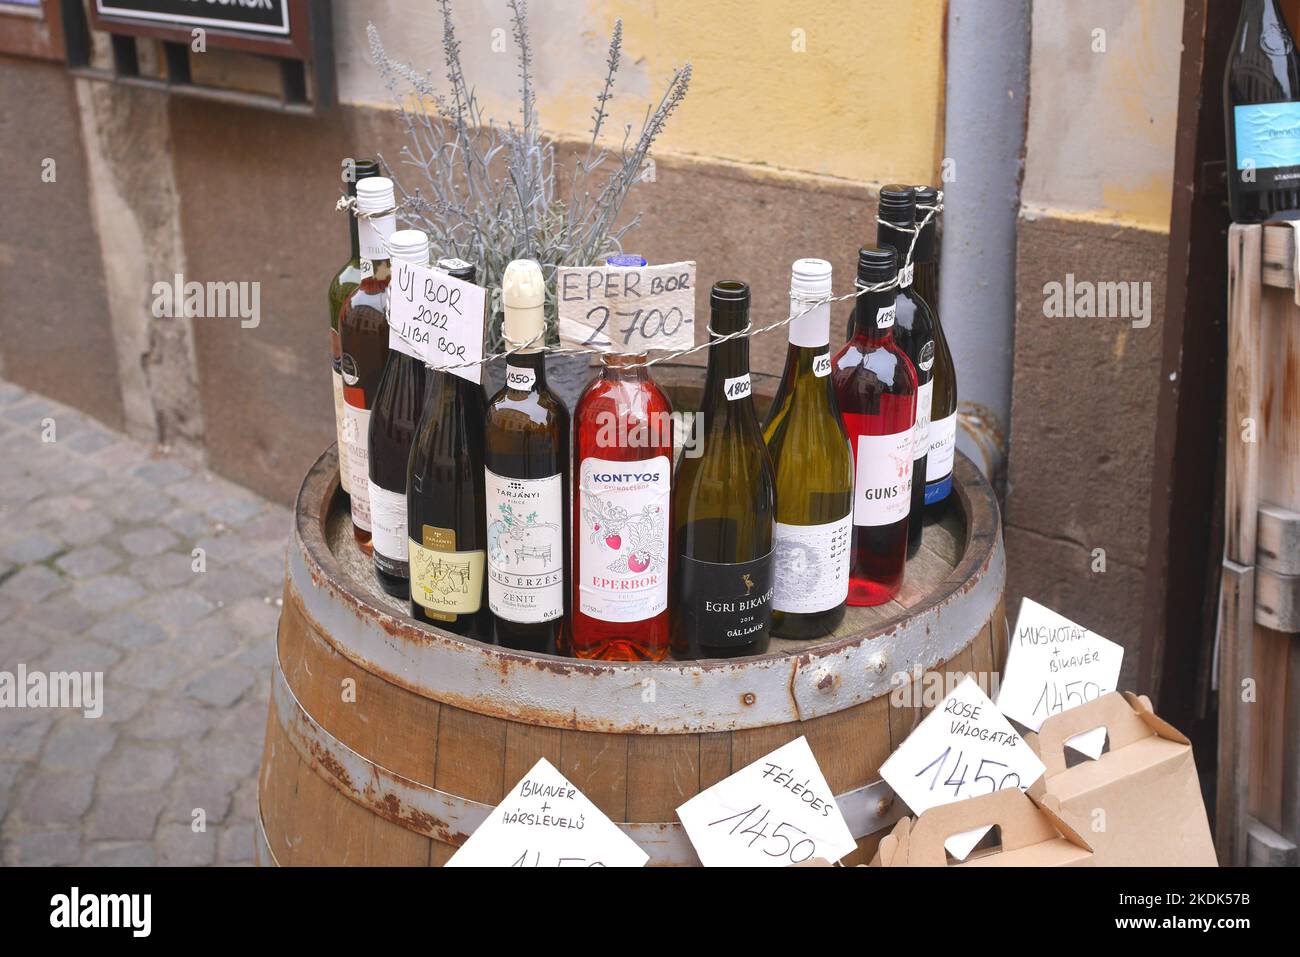 Display of wines for sale outside a traditional wine seller, Eger, Hungary Stock Photo